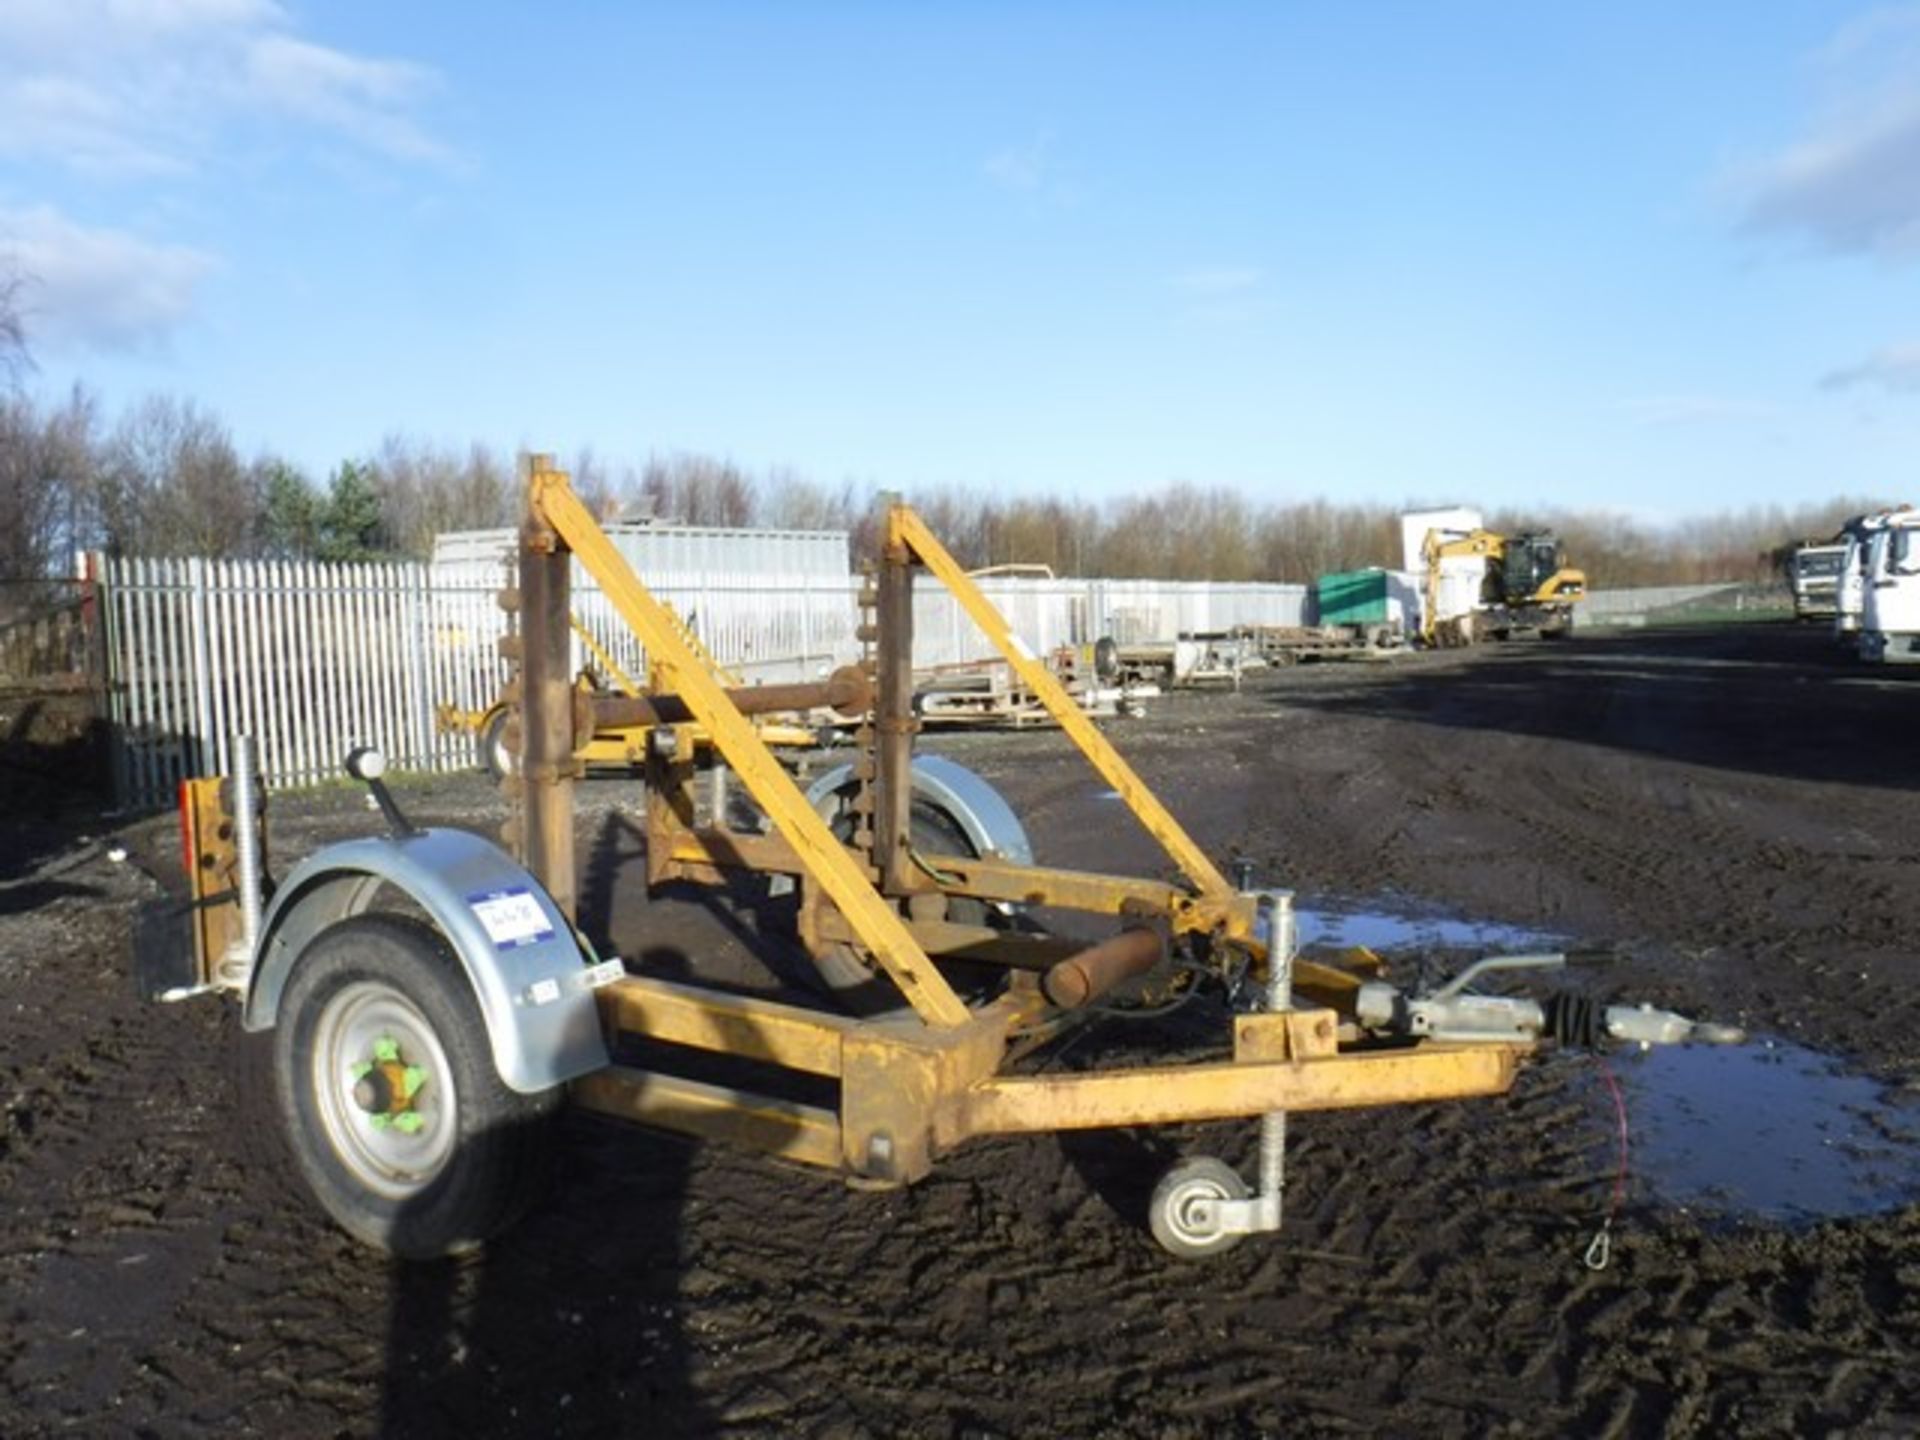 2006 cable reel trailer SN C/751/16 Asset No 758-6142